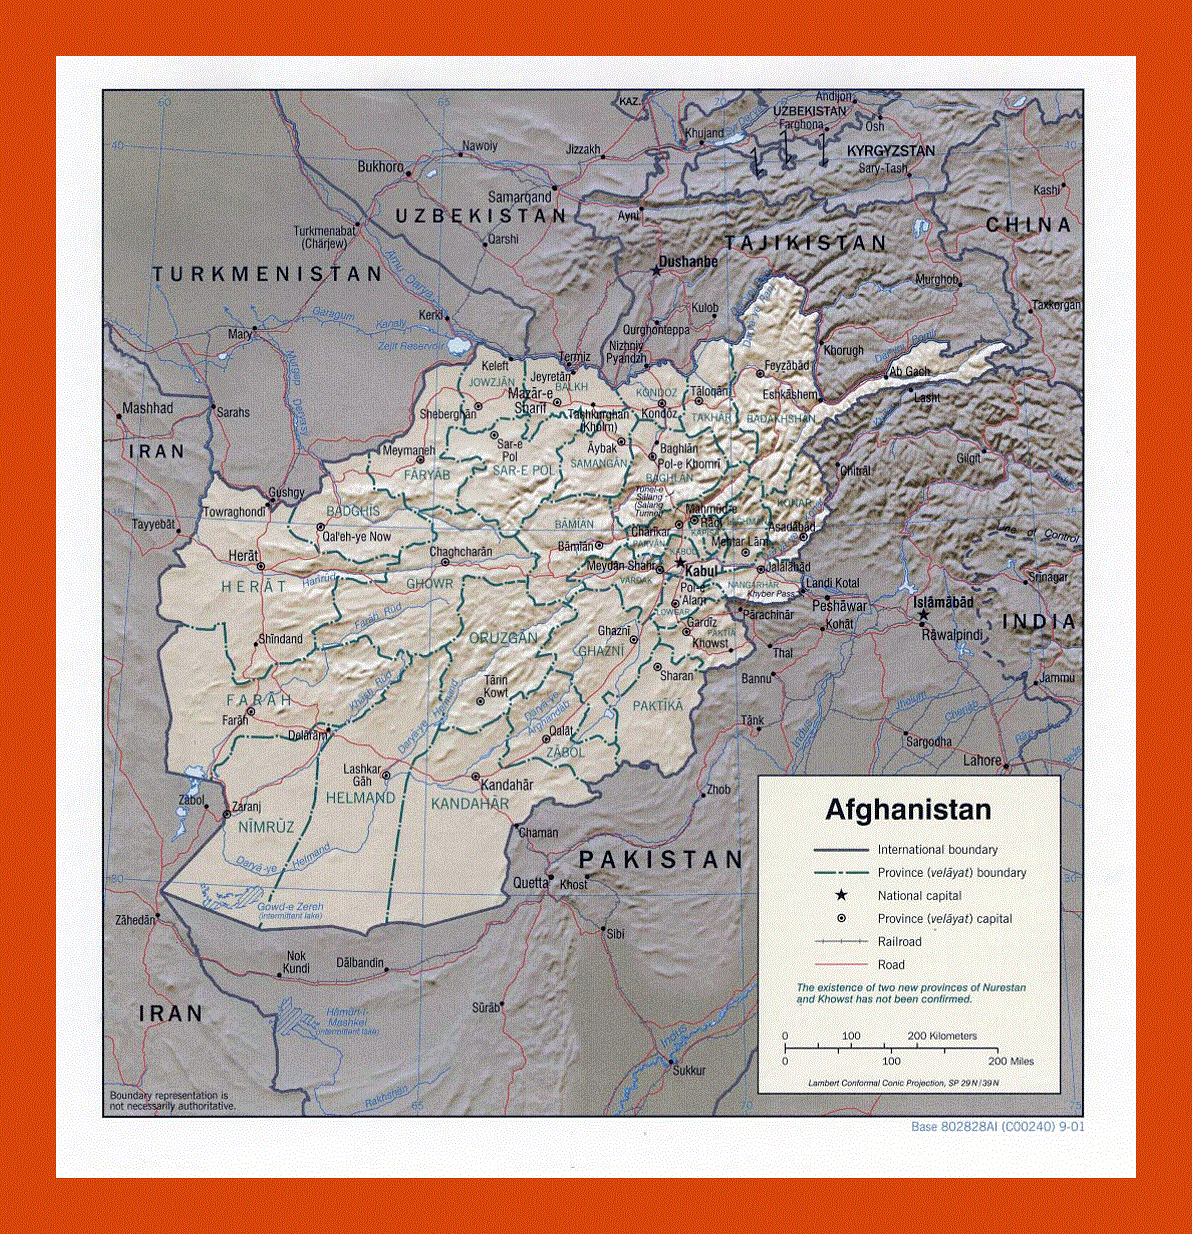 Political and administrative map of Afghanistan - 2001